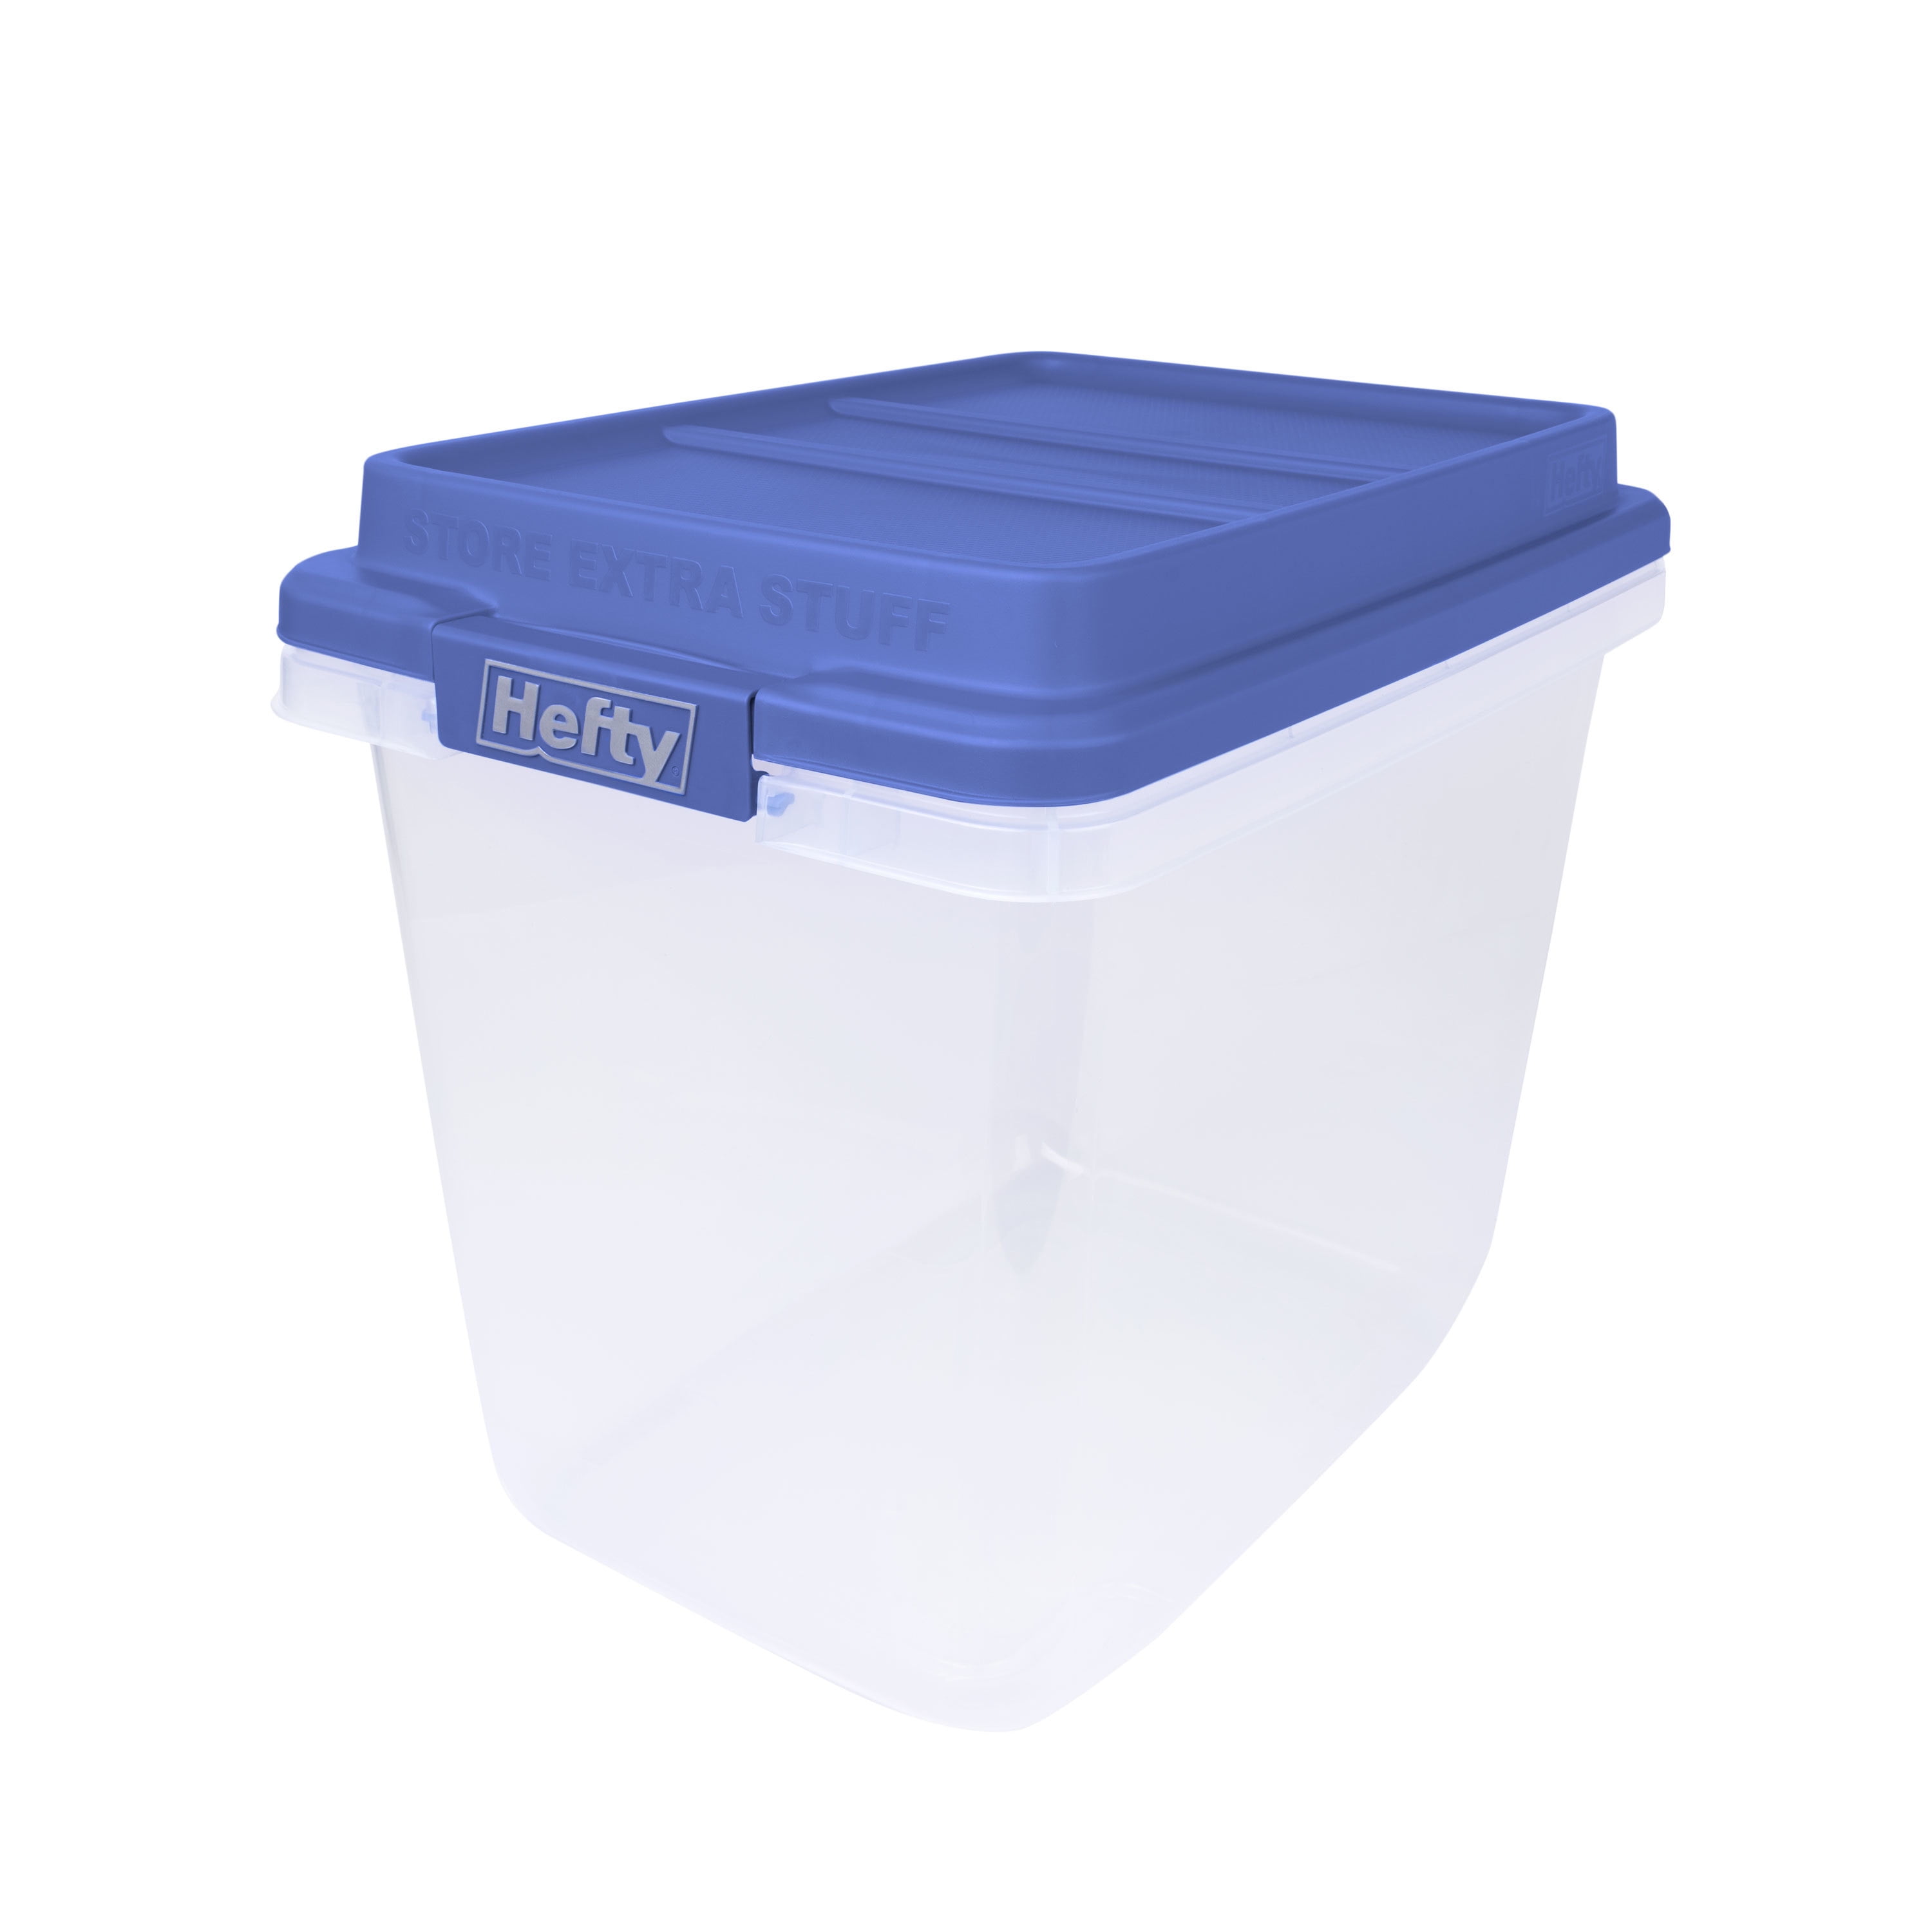 PLASTIC STACKING PARTS STORAGE BINS 3 COLOURS 7 SIZES GREAT QUALITY 